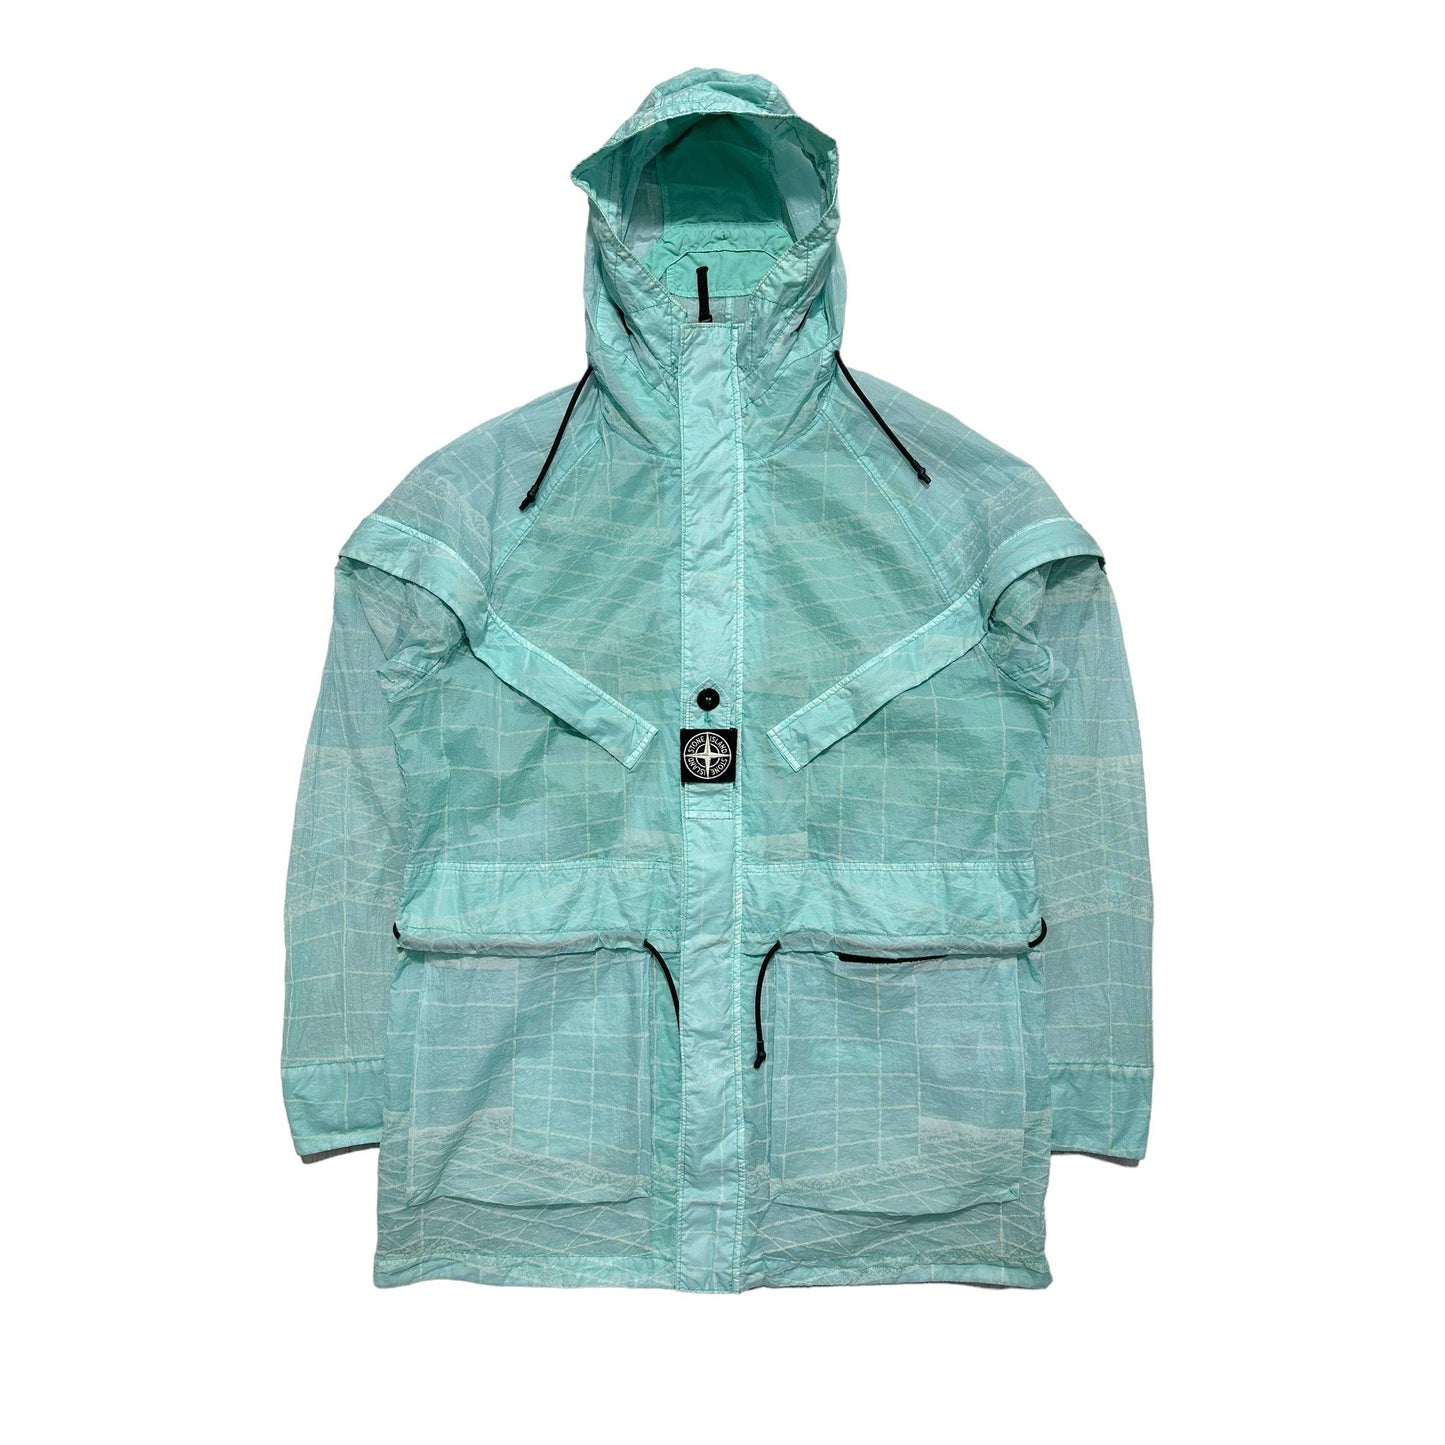 Stone Island Reflective Grid Lamy-TC Long Jacket with Special Process Badge - Known Source